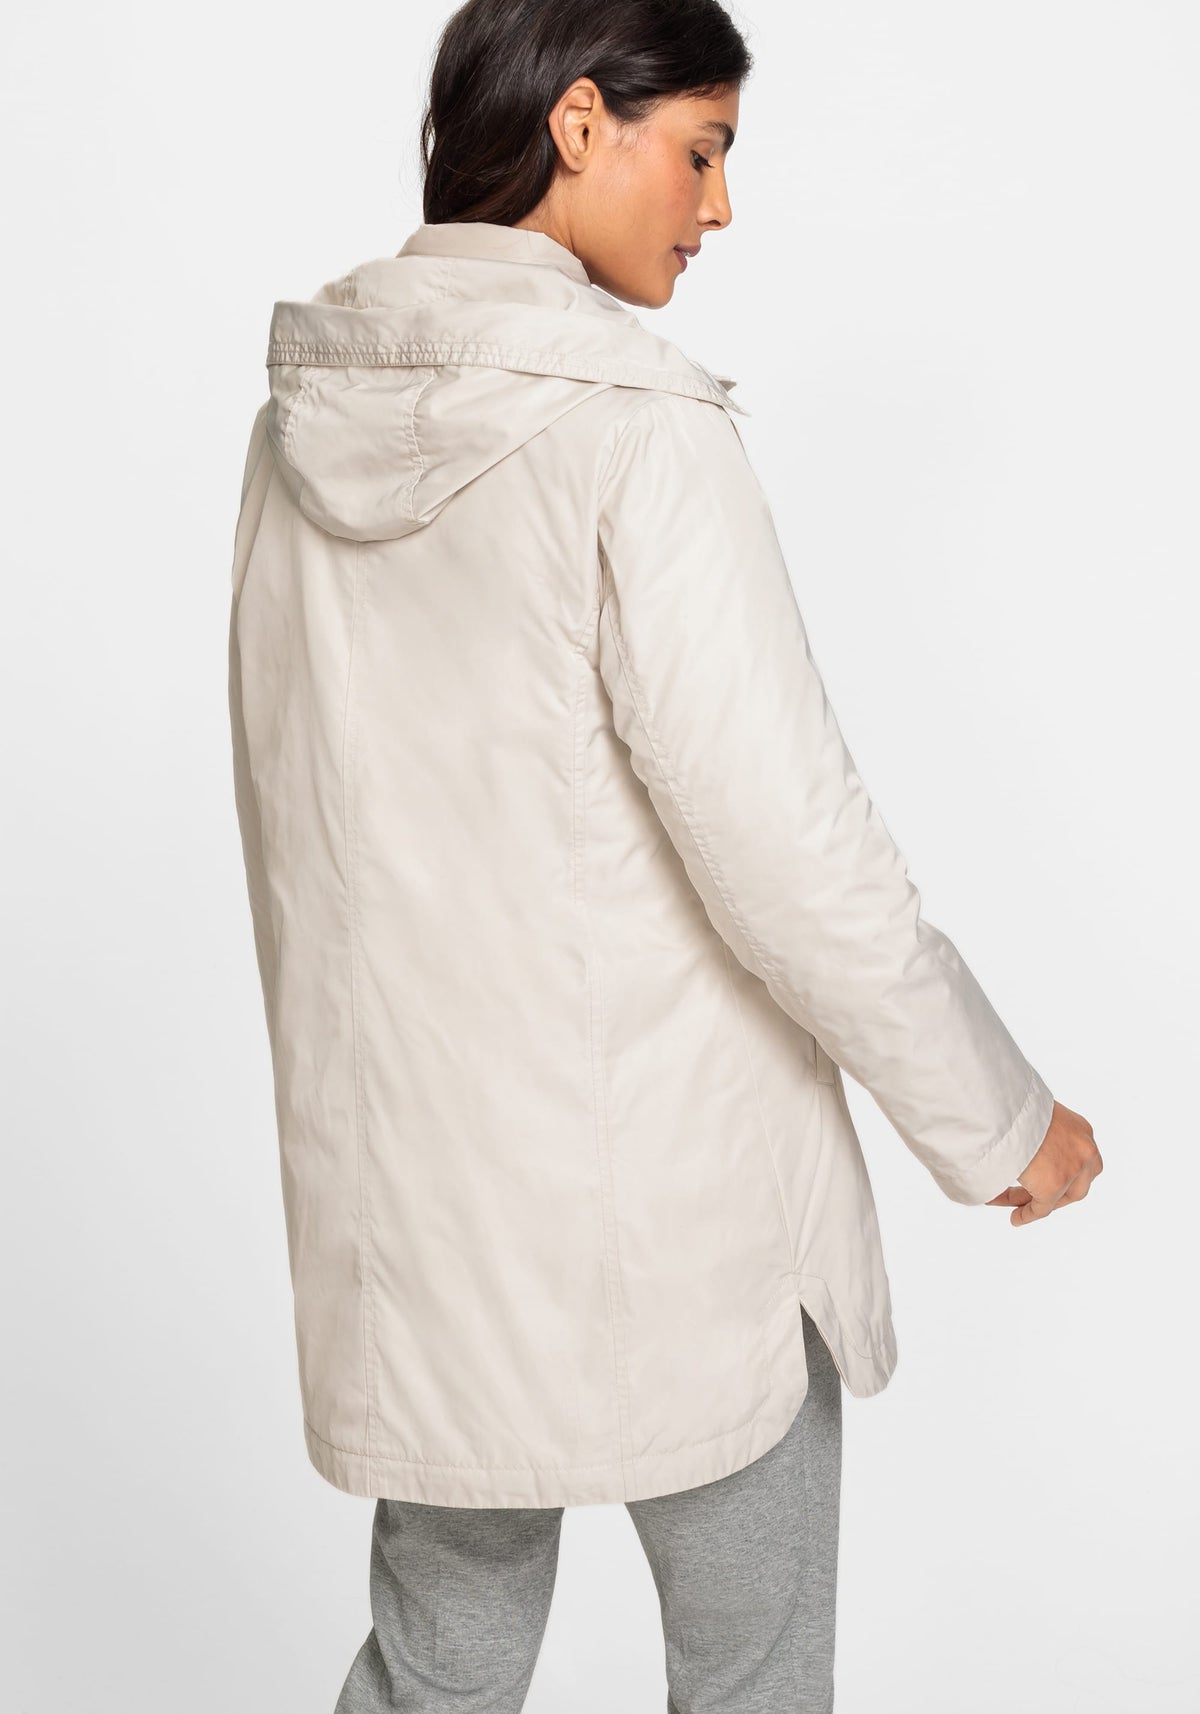 4-in-1 Convertible Jacket containing REPREVE®